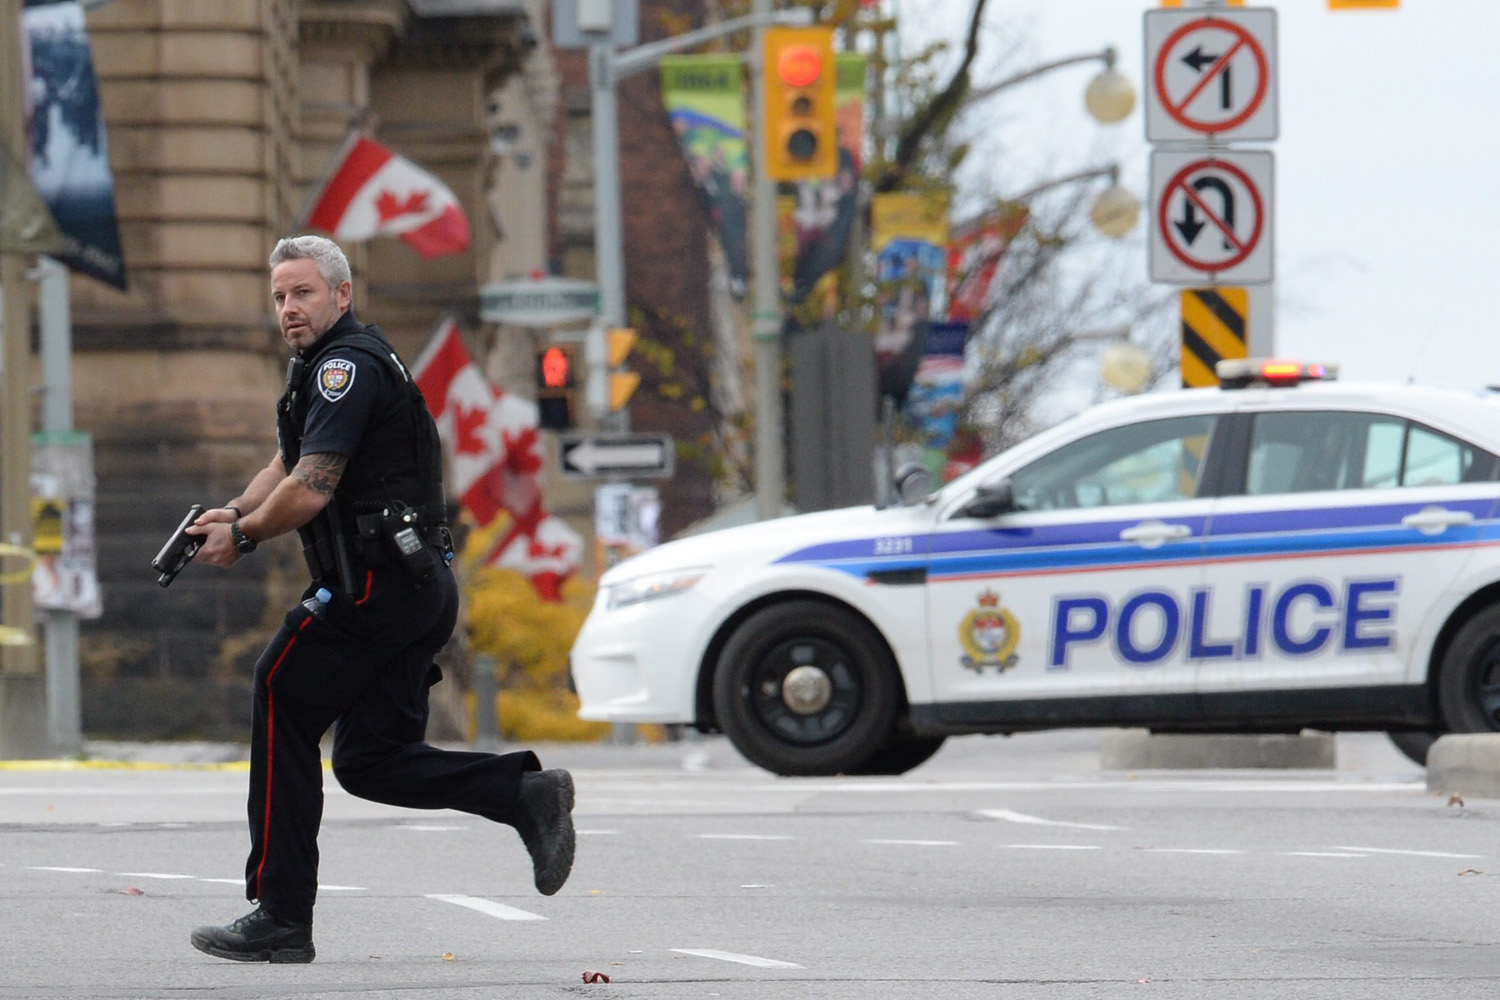 An Ottawa police officer runs with his weapon drawn outside Parliament Hill in Ottawa on Oct. 22, 2014.